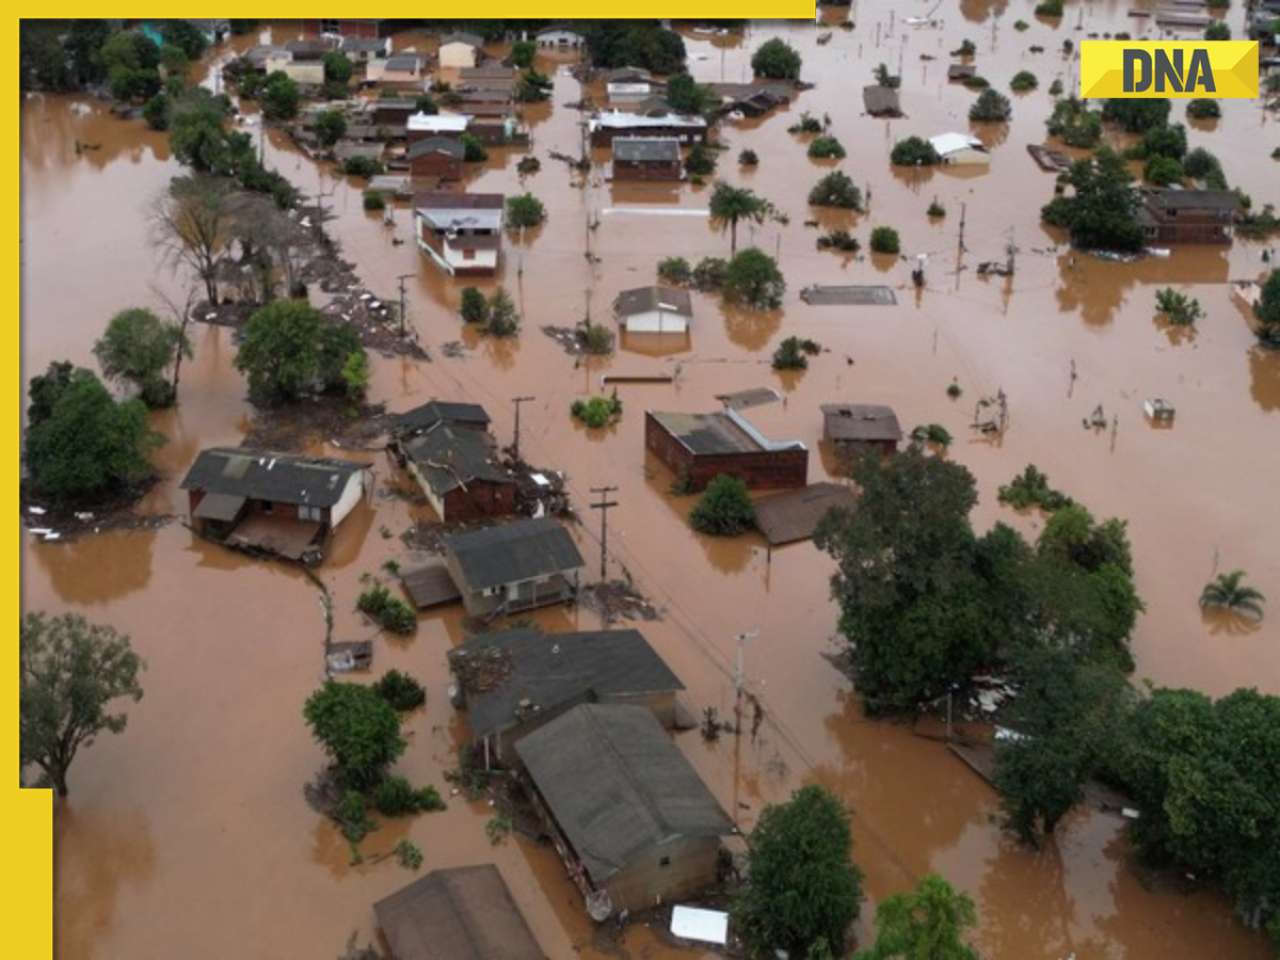 Brazil Floods: Death toll mounts to 75, over 100 missing